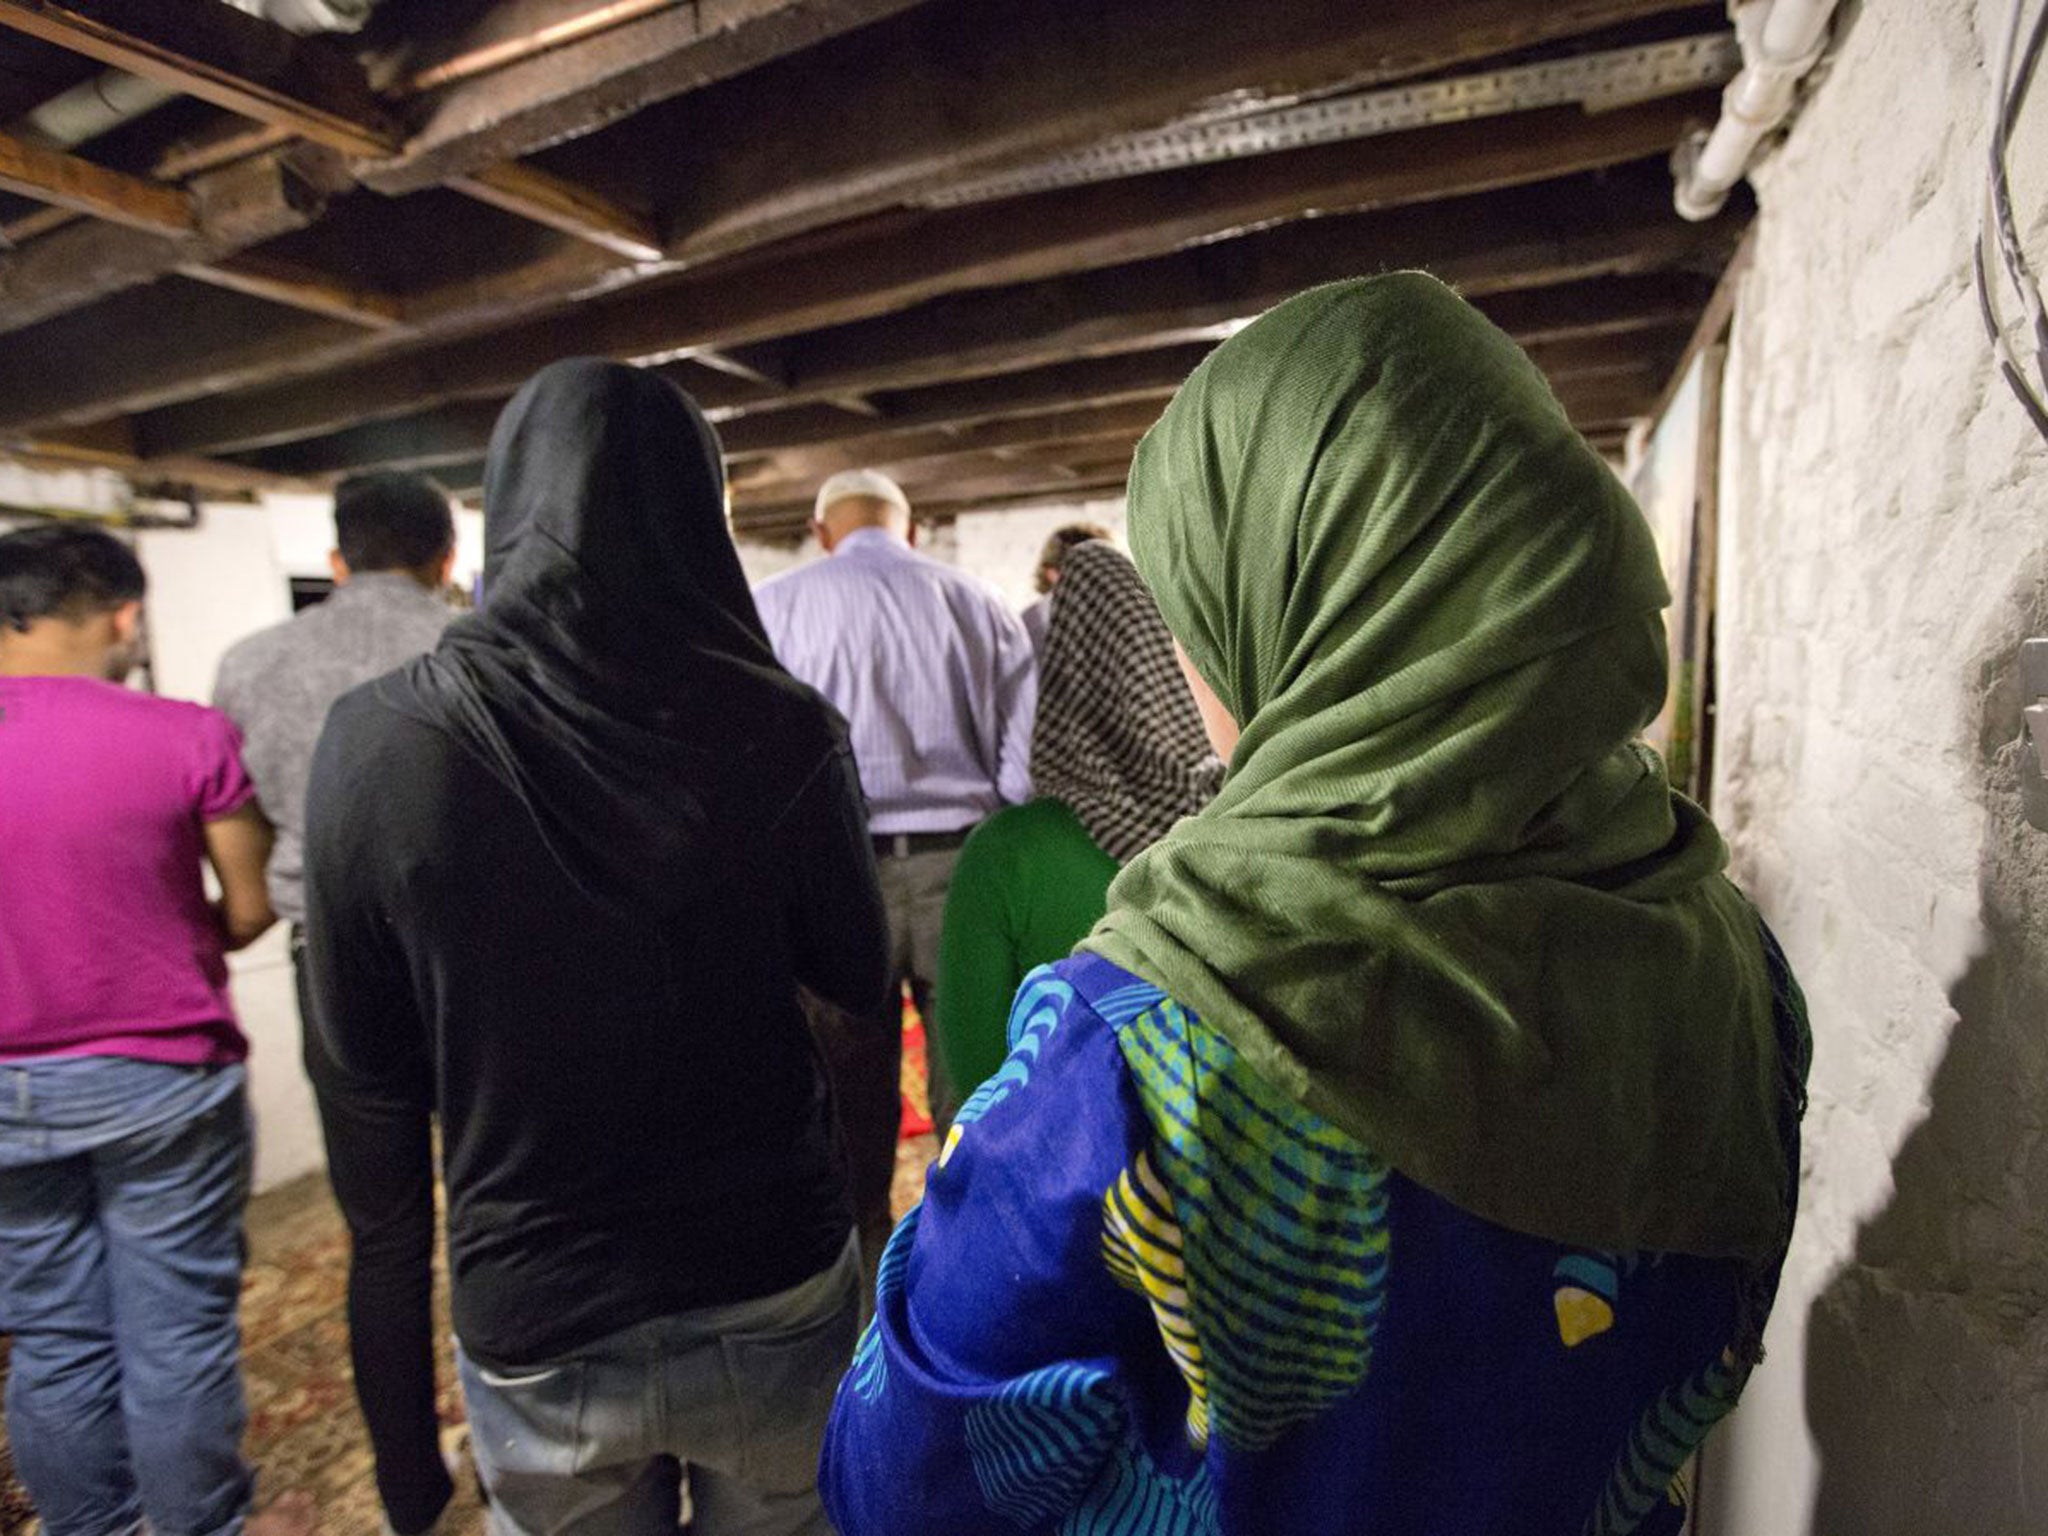 Women have borne the brunt of the increase in Islamophobic attacks